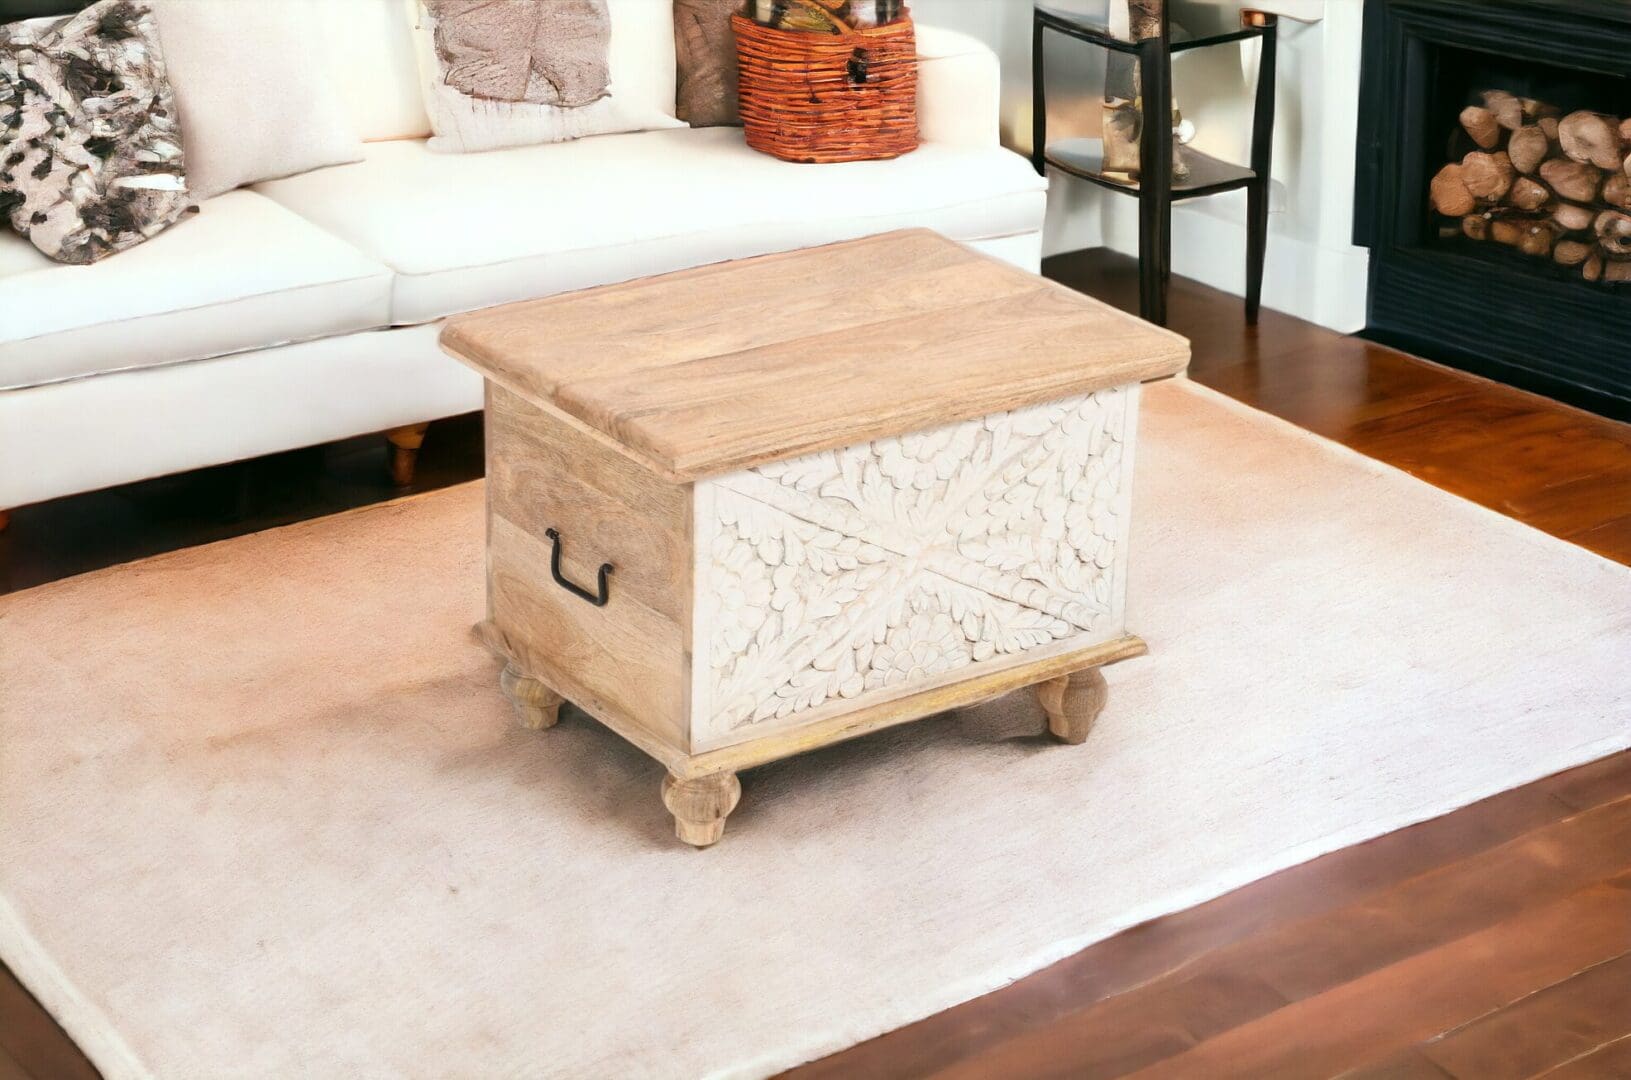 A wooden trunk with a white design on it.